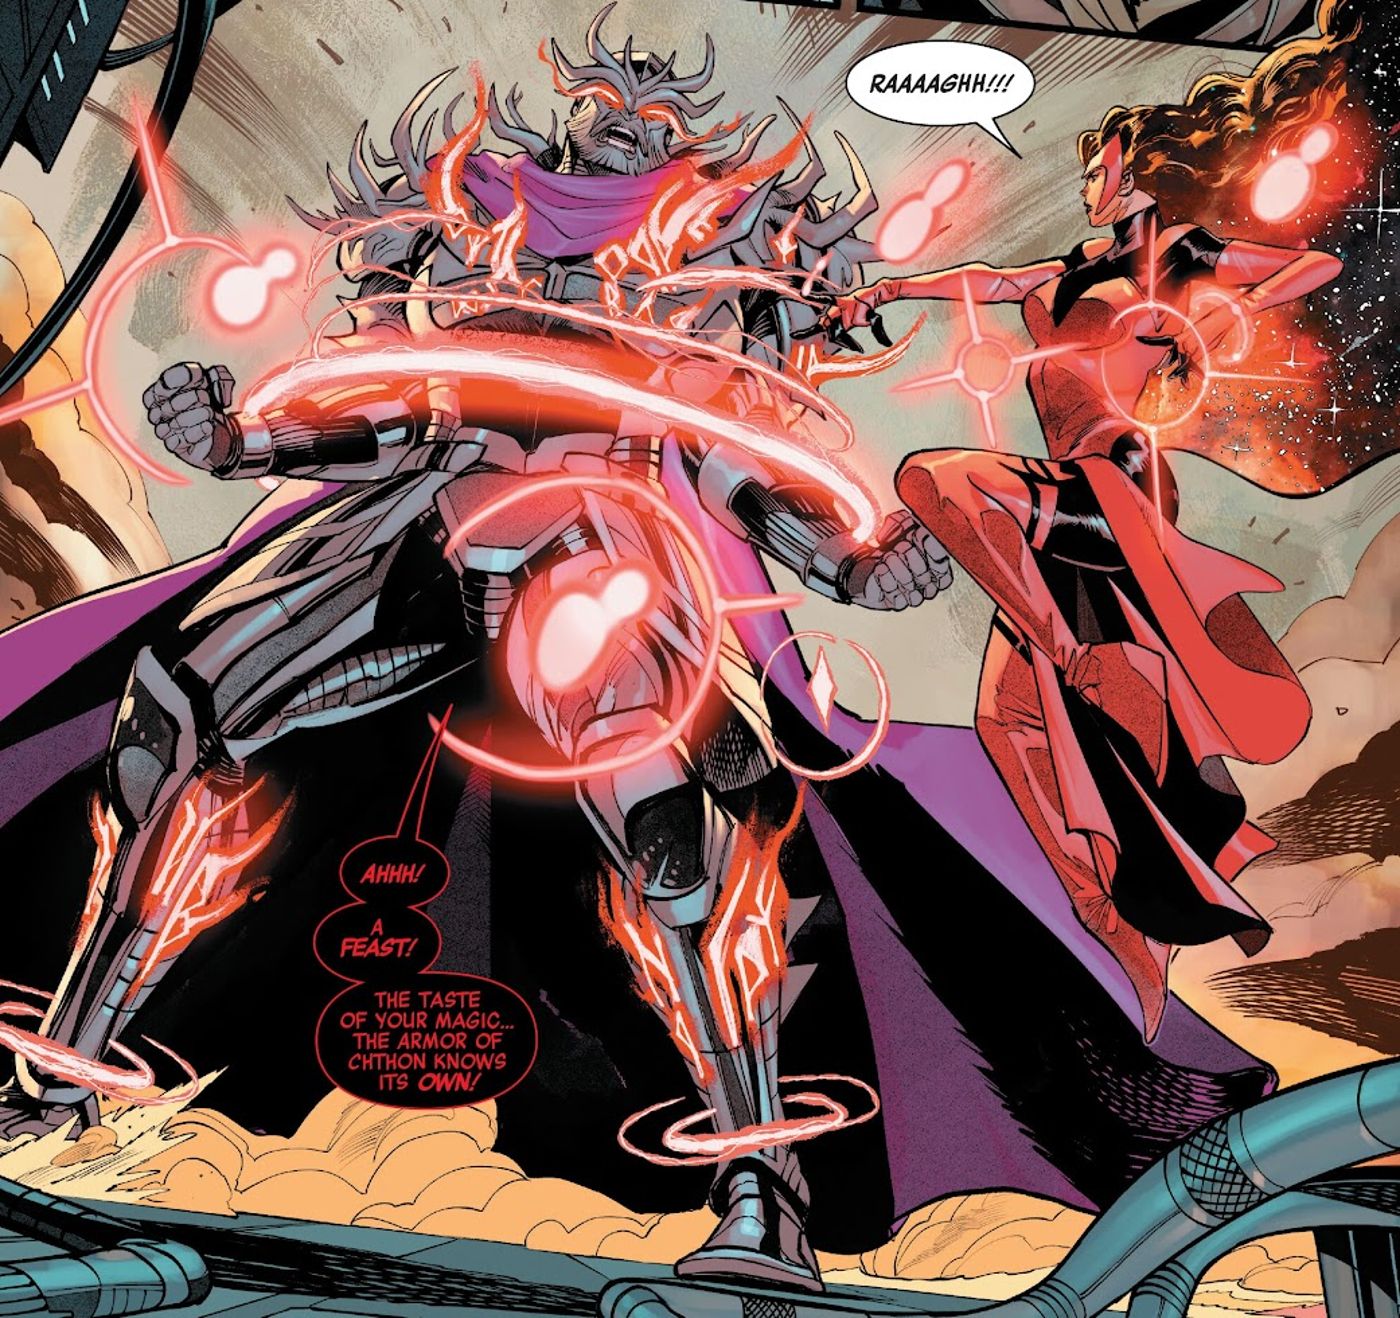 “The Armor of Chthon”: Avengers’ New Weapon Is Scarlet Witch’s Version of Kryptonite